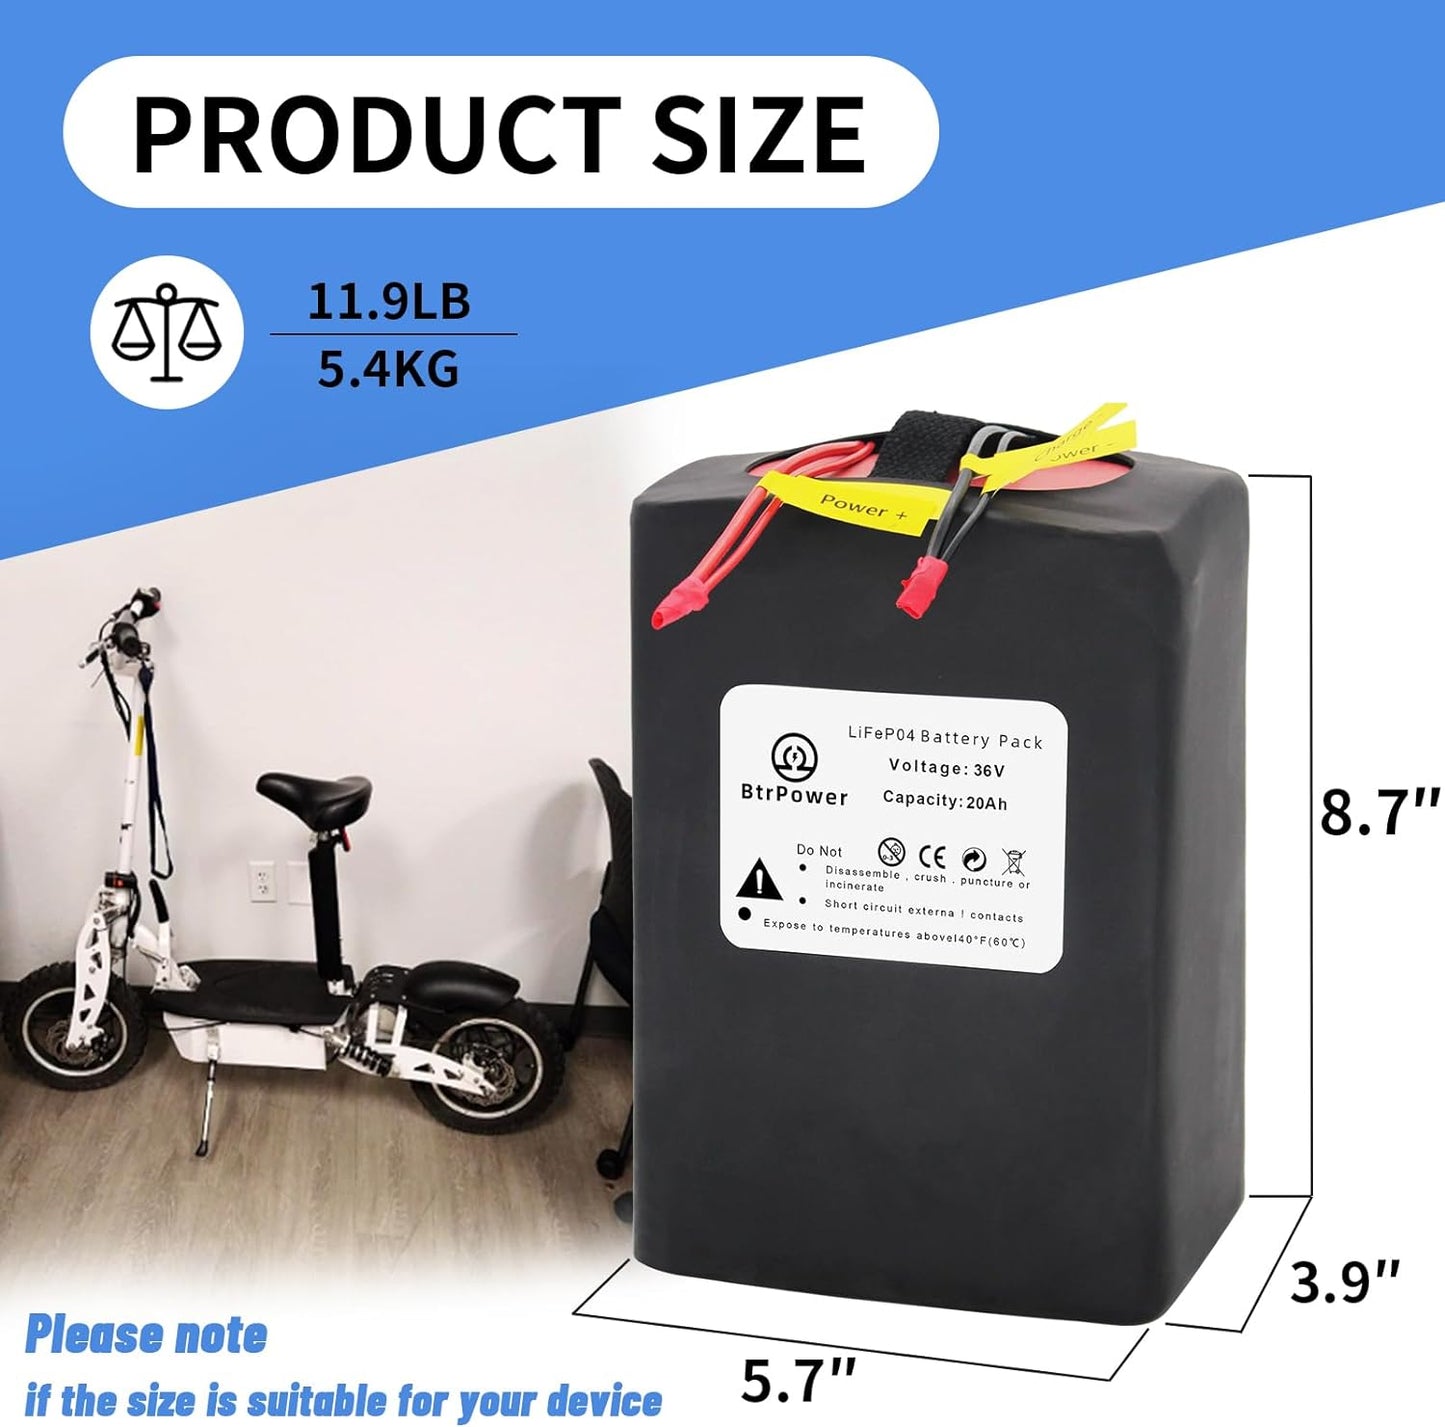 BtrPower Ebike Battery 36V 20AH LiFePo4 Battery Pack with 3A Charger, 30A BMS